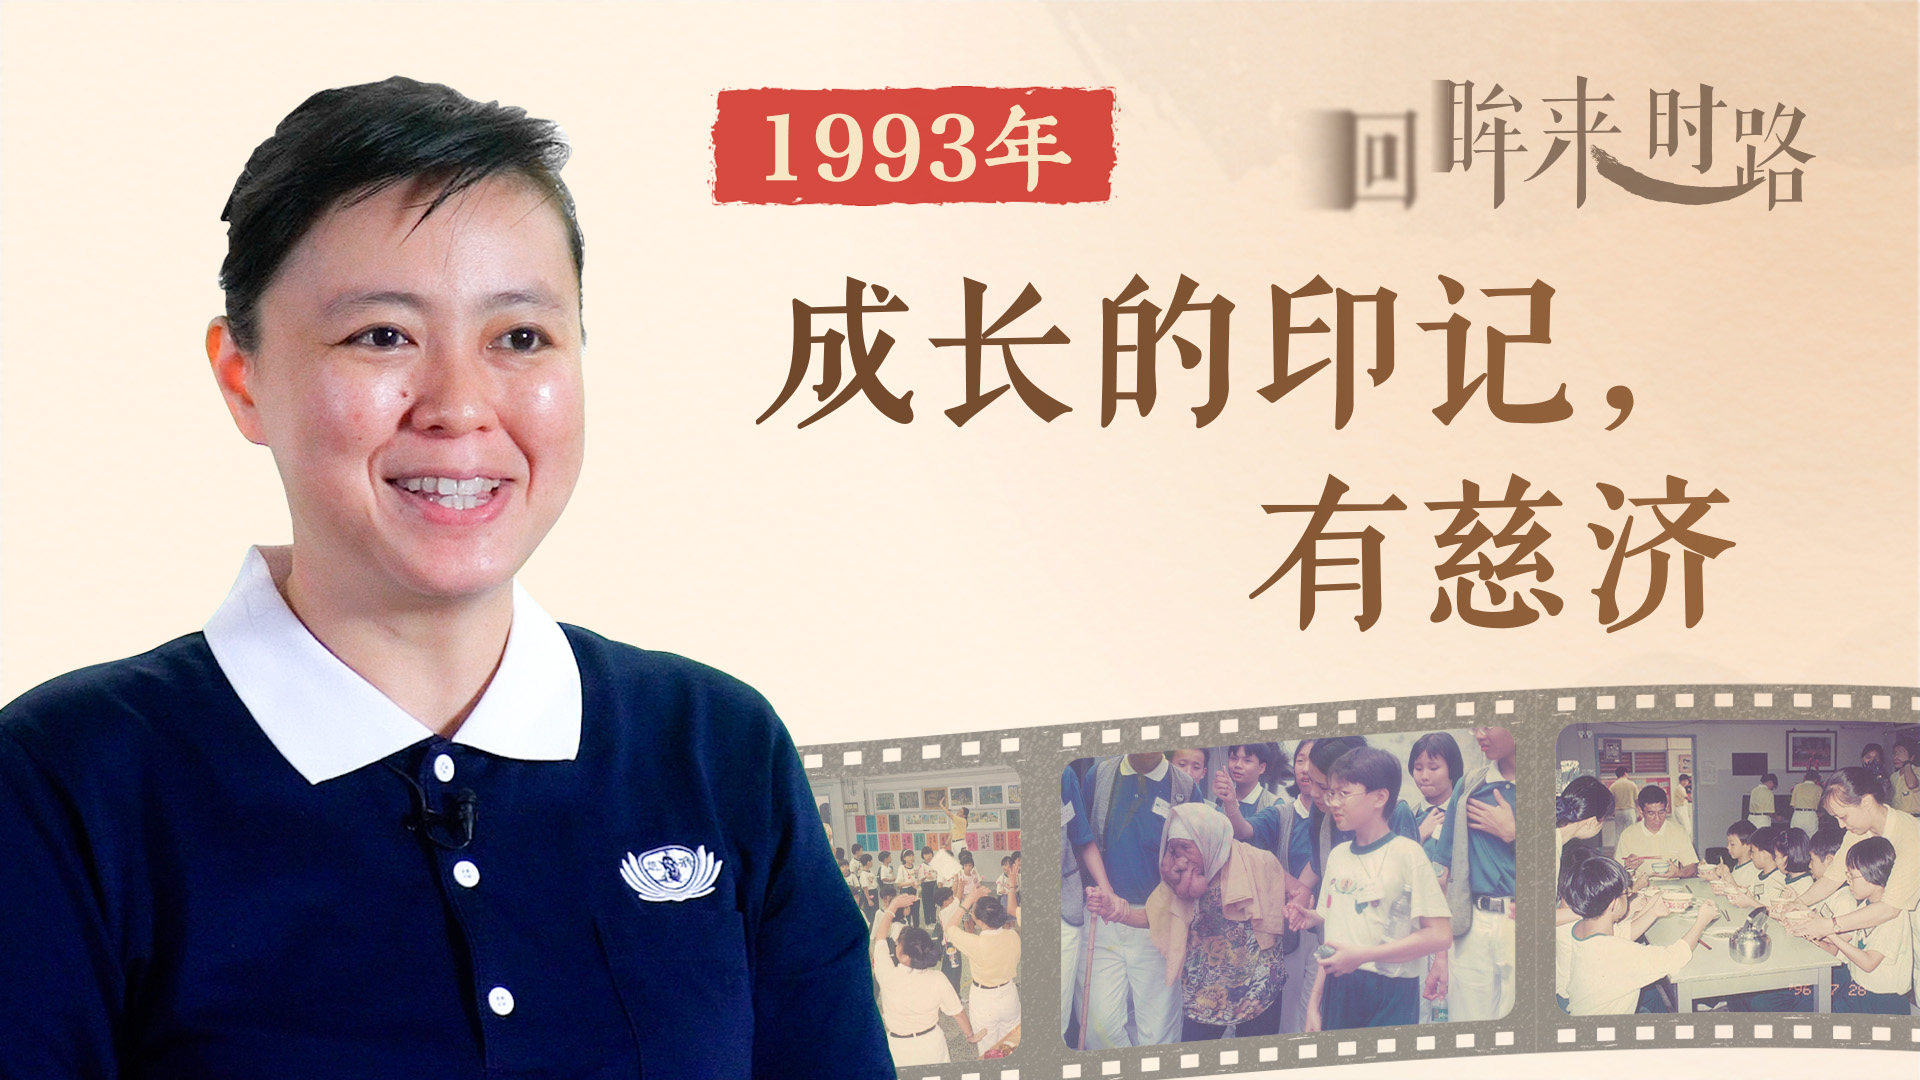 1993, the year Tzu Chi entered my life